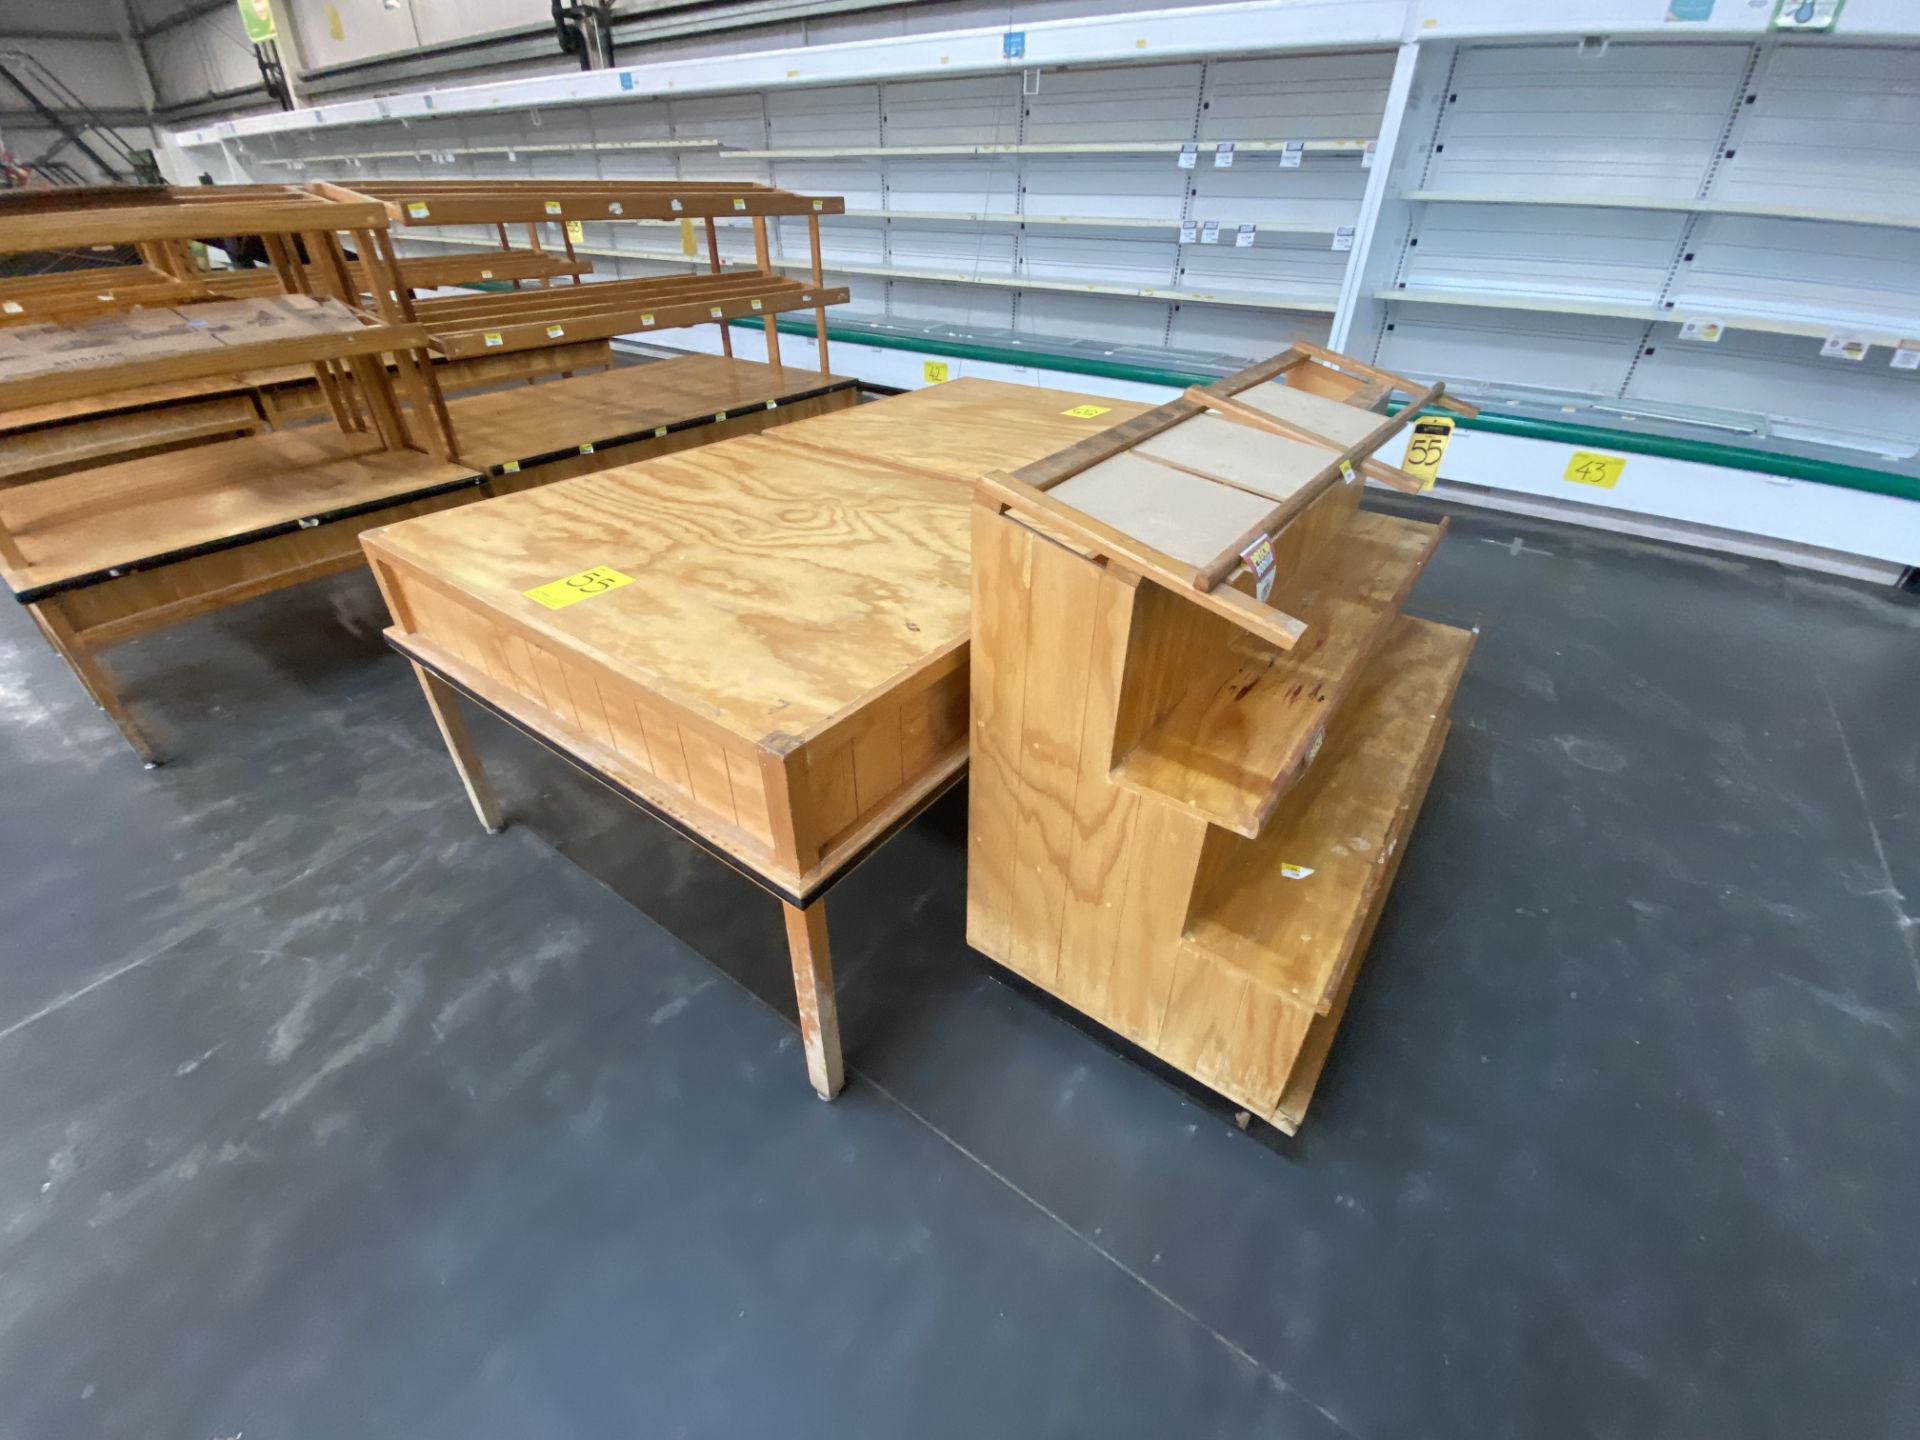 3 wooden tables for exhibition, measures 1.20 x 1.00 x 0.80; wooden Display cabinet for tortillas